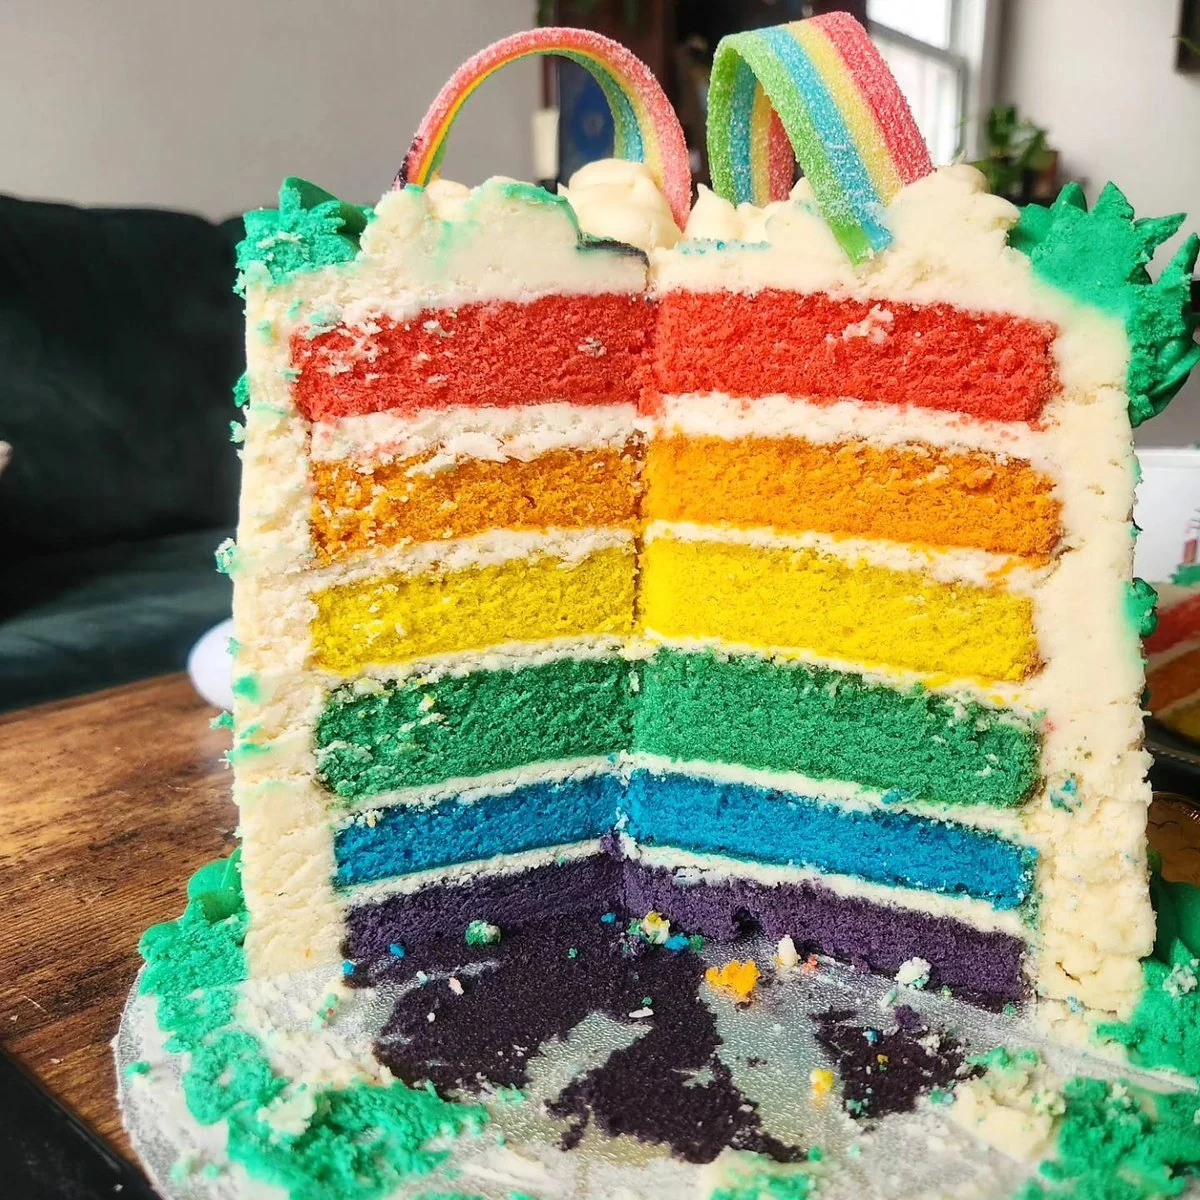 🌈🎂 Create unforgettable memories with colorful and creative cakes that capture the magic of rainbows.